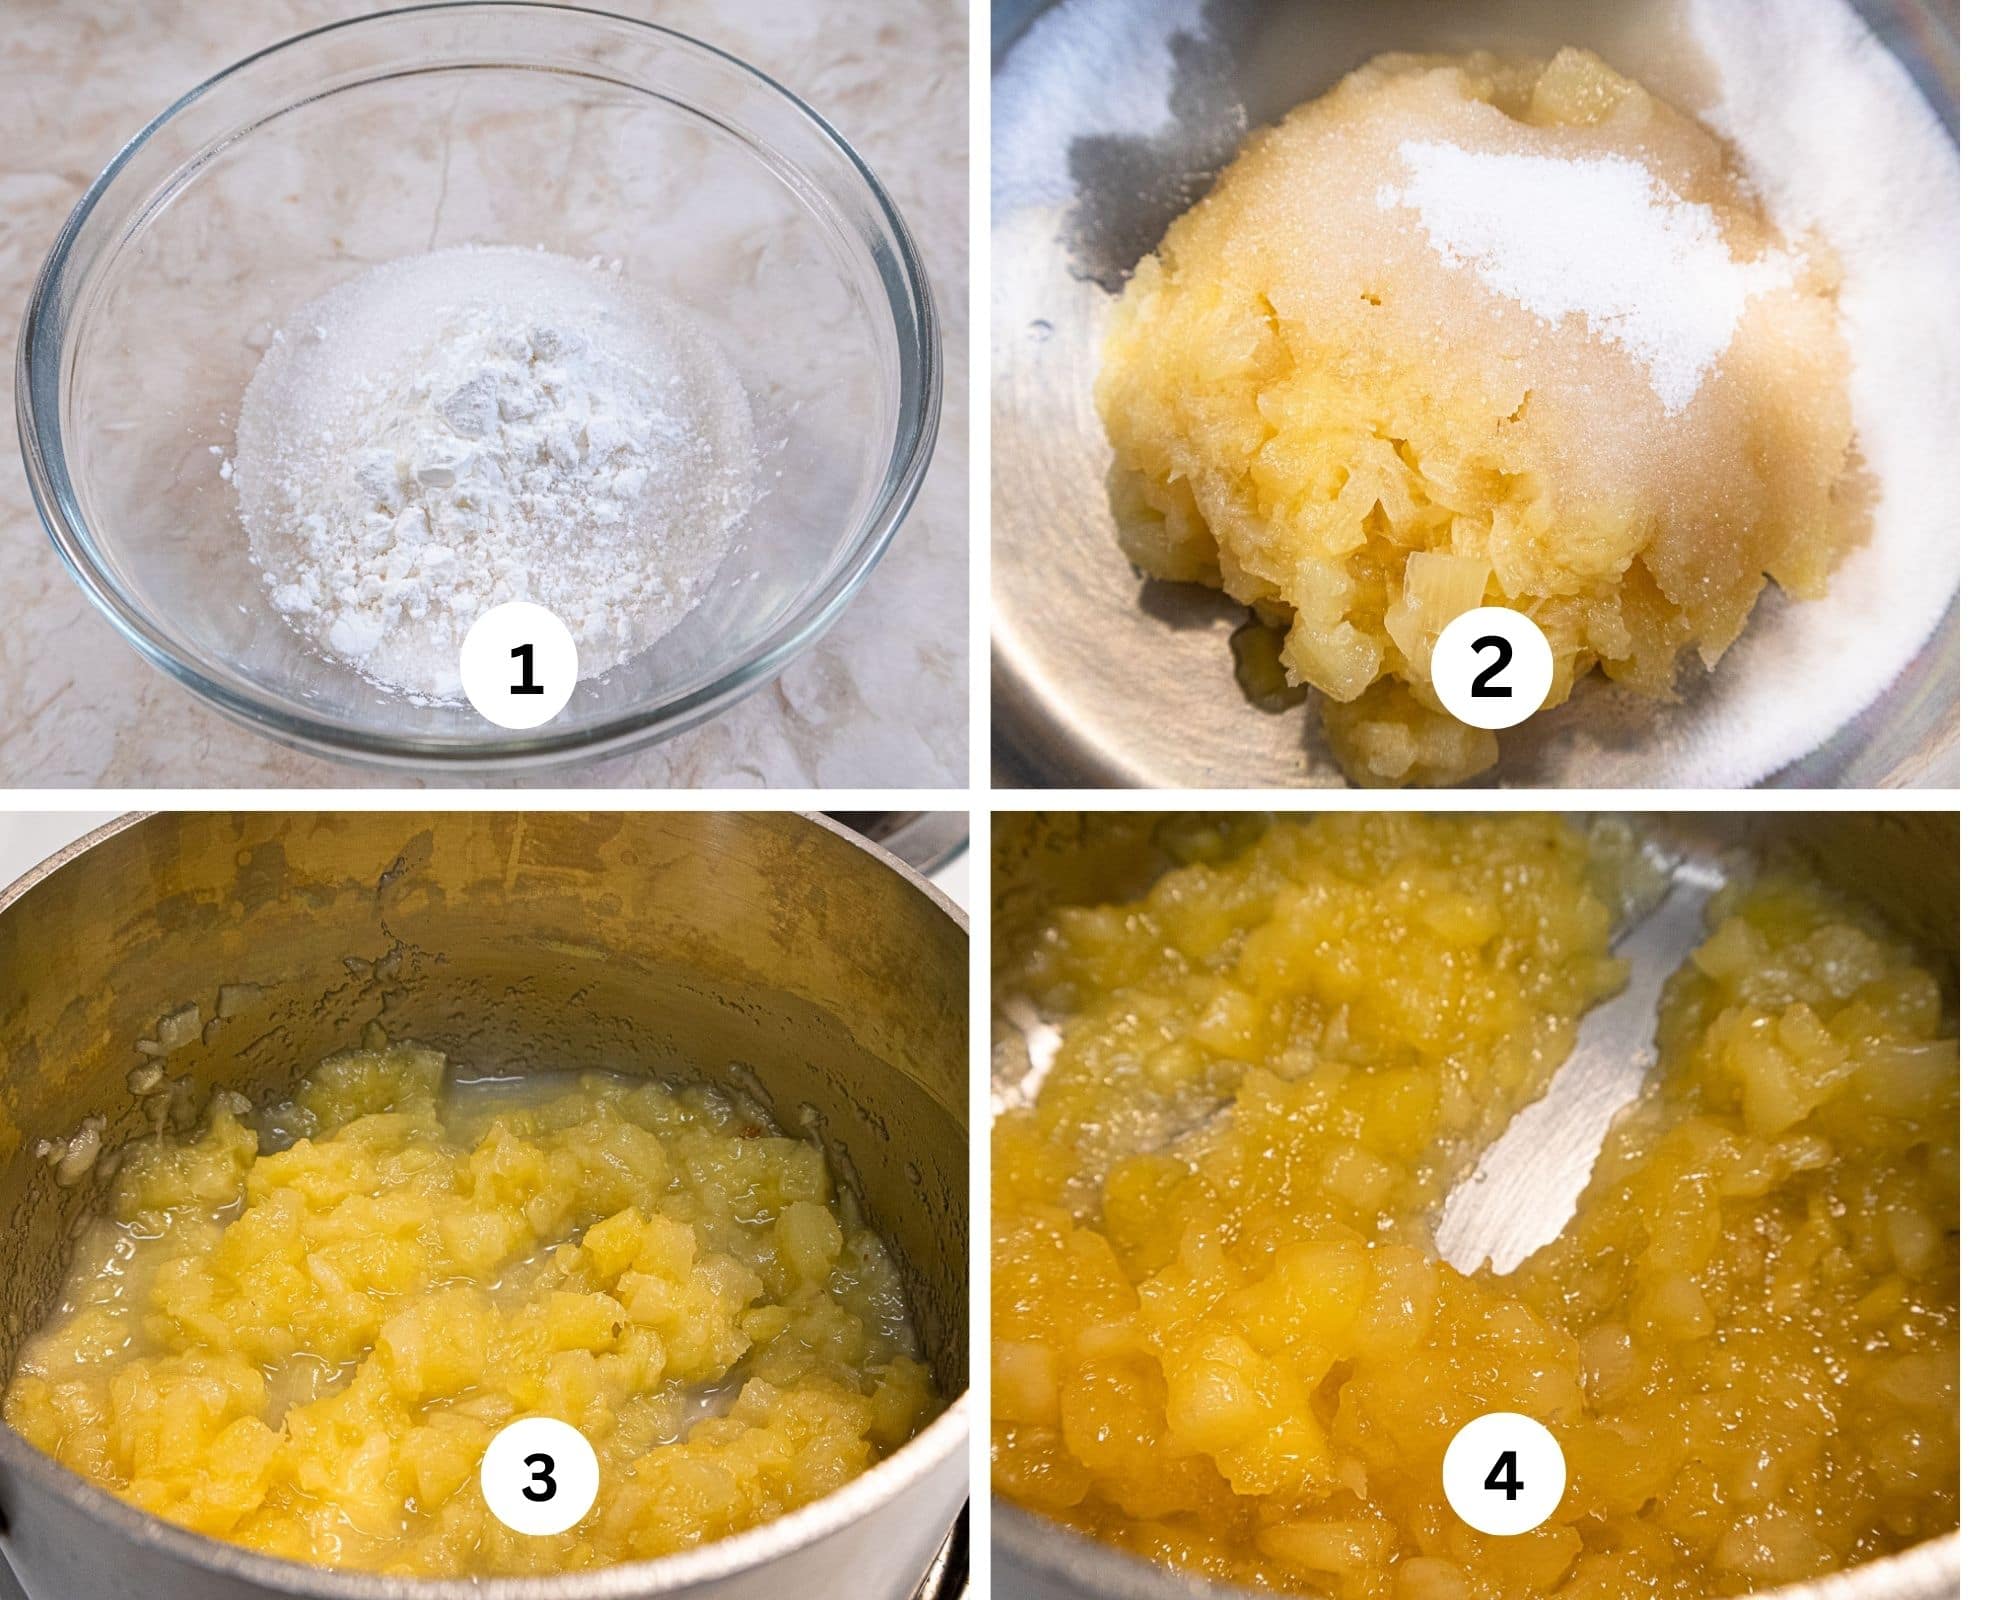 The first collage shows the cornstarch and sugar in a bowl, added to the crushed pineapple, put into a saucepan and cooked. 